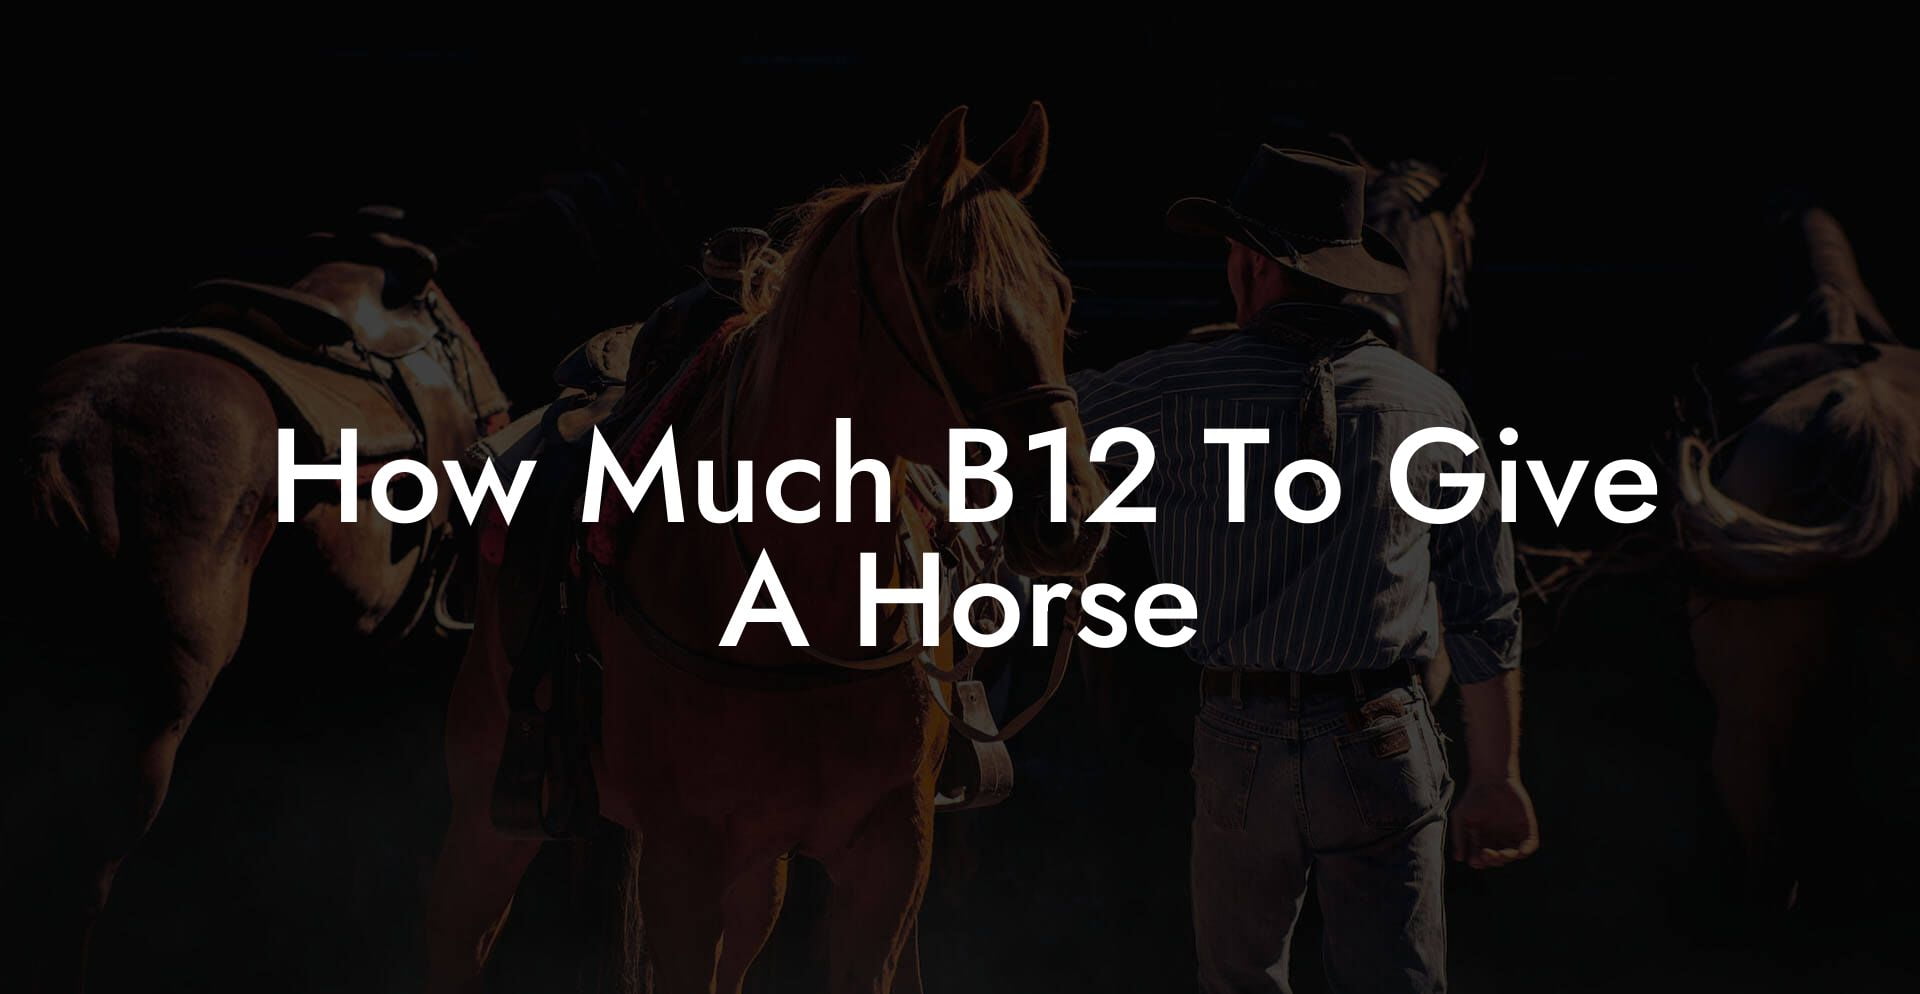 How Much B12 To Give A Horse